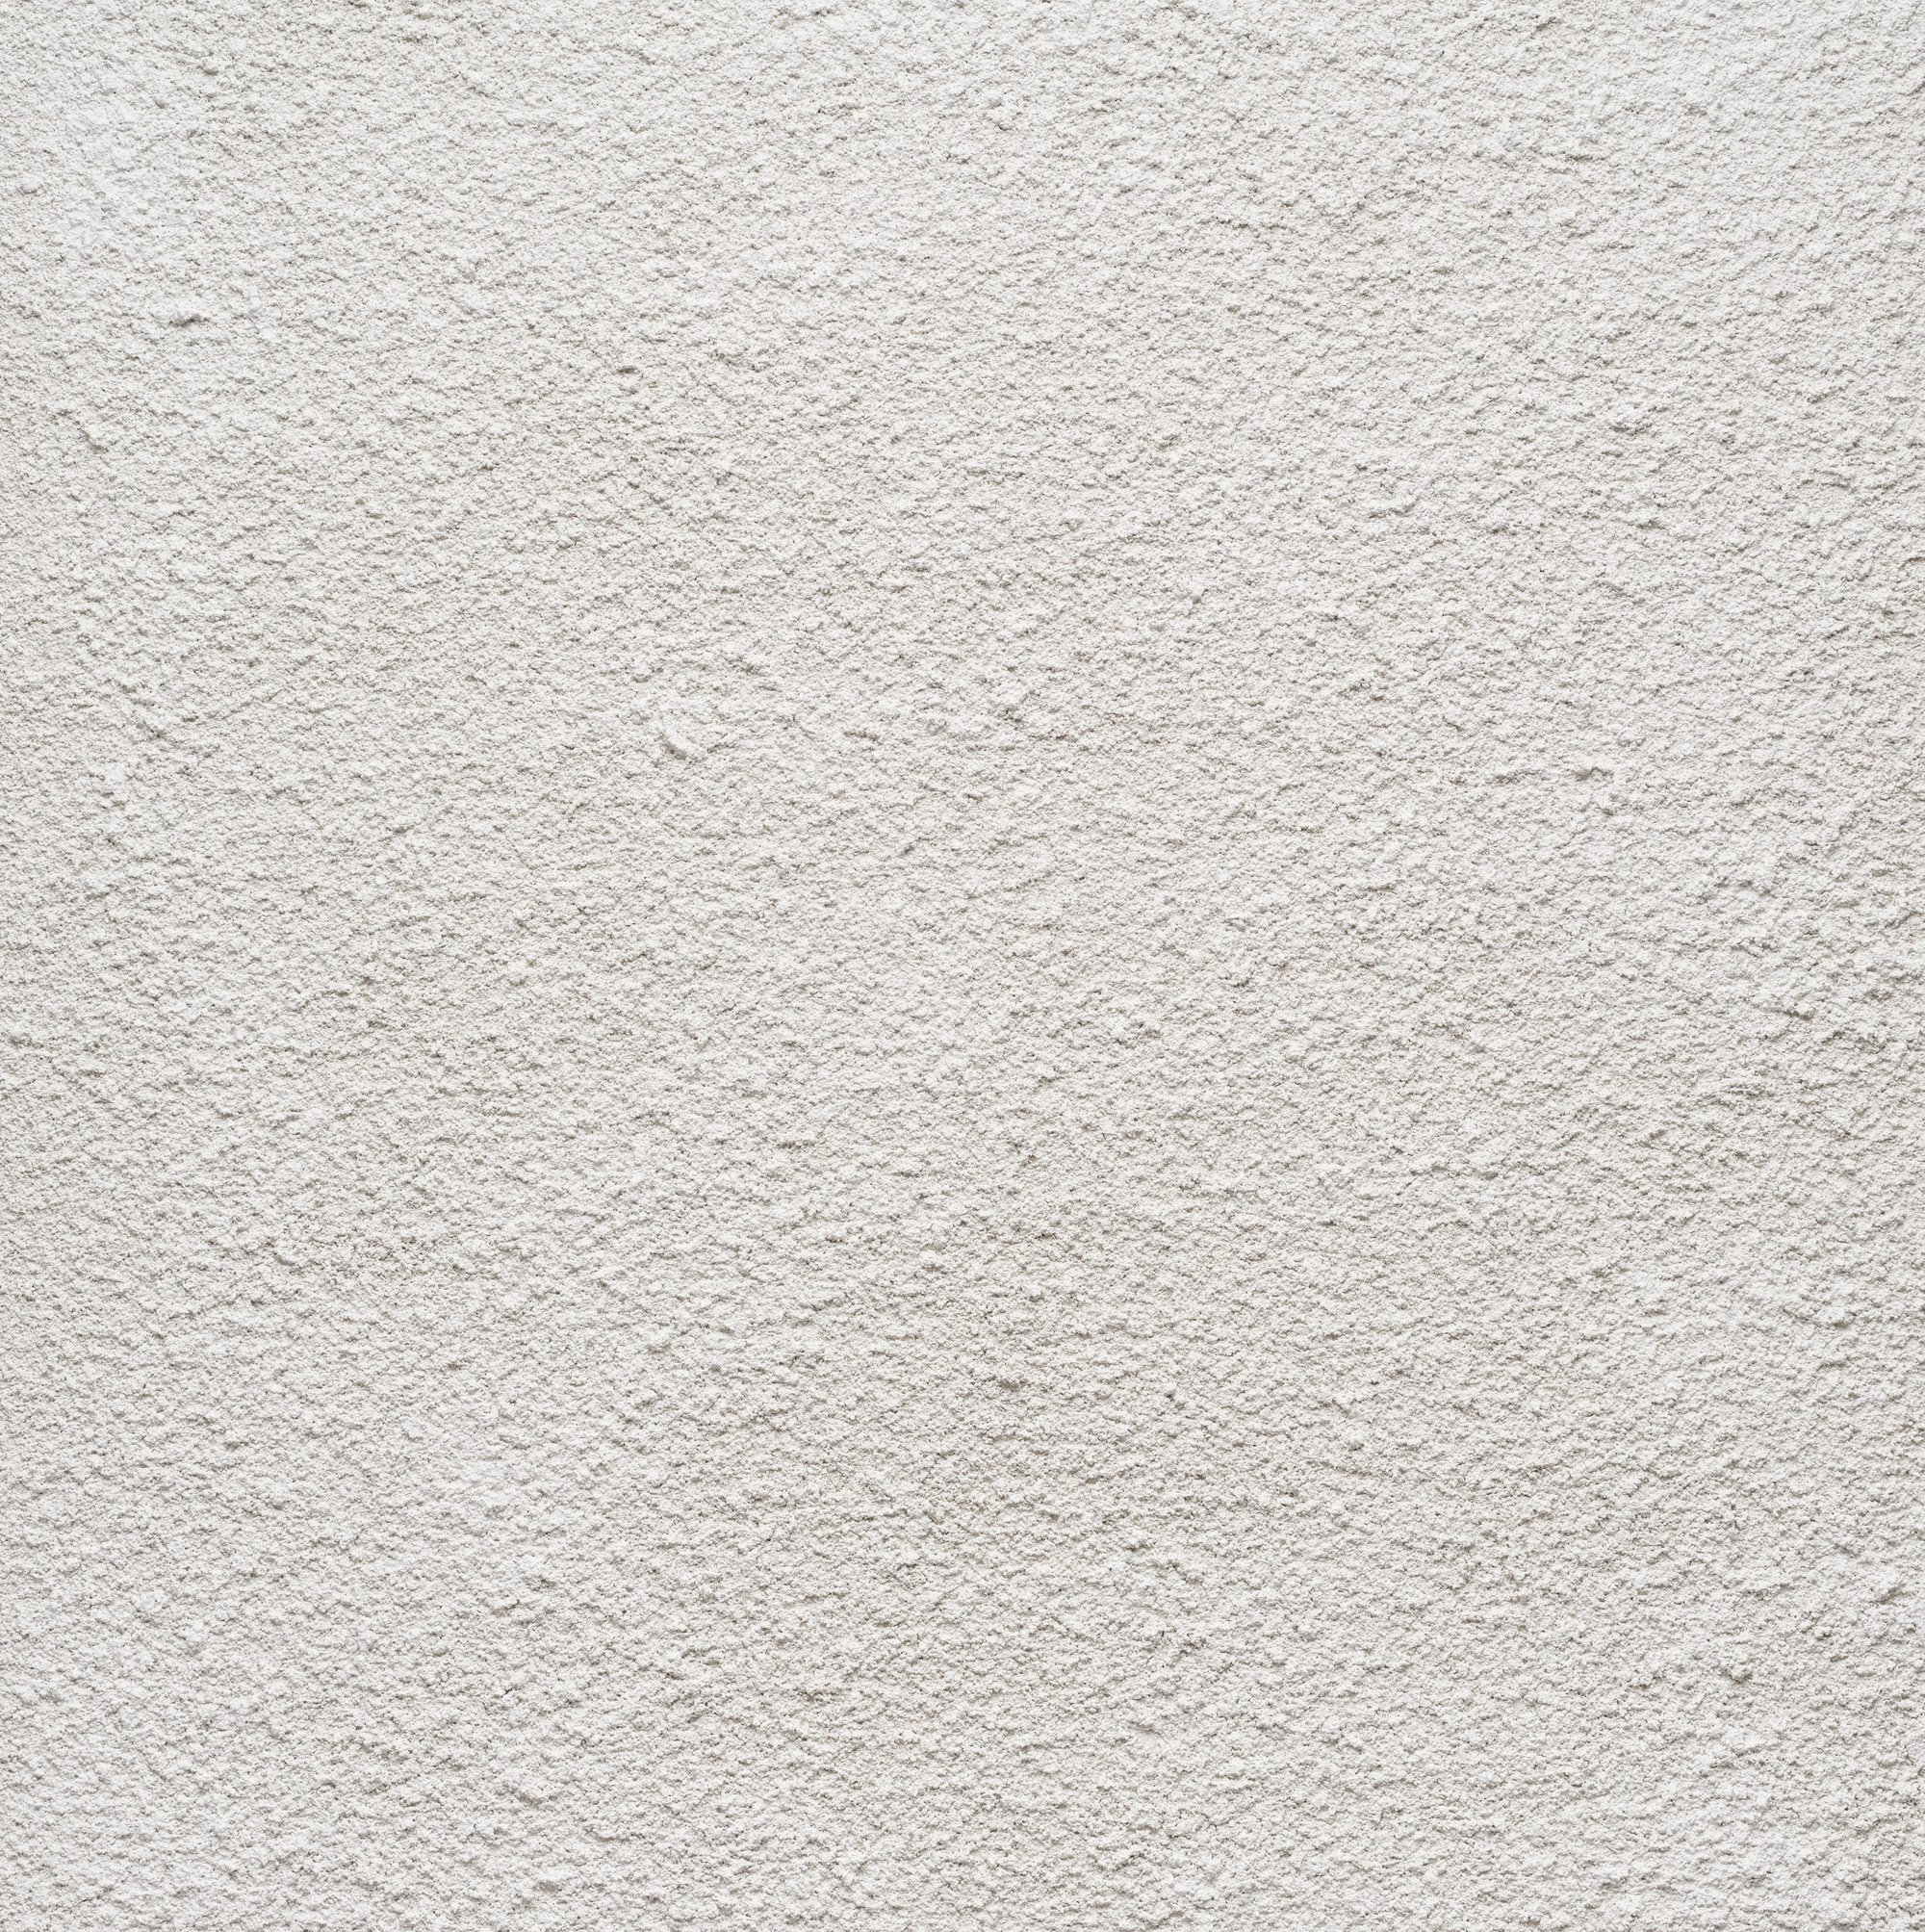 Christodoulos Panayiotou, Untitled, stucco plaster finish, wall paint, foam board, mortar, wooden frame, 126 x 121.3 x 5 cm, 2021